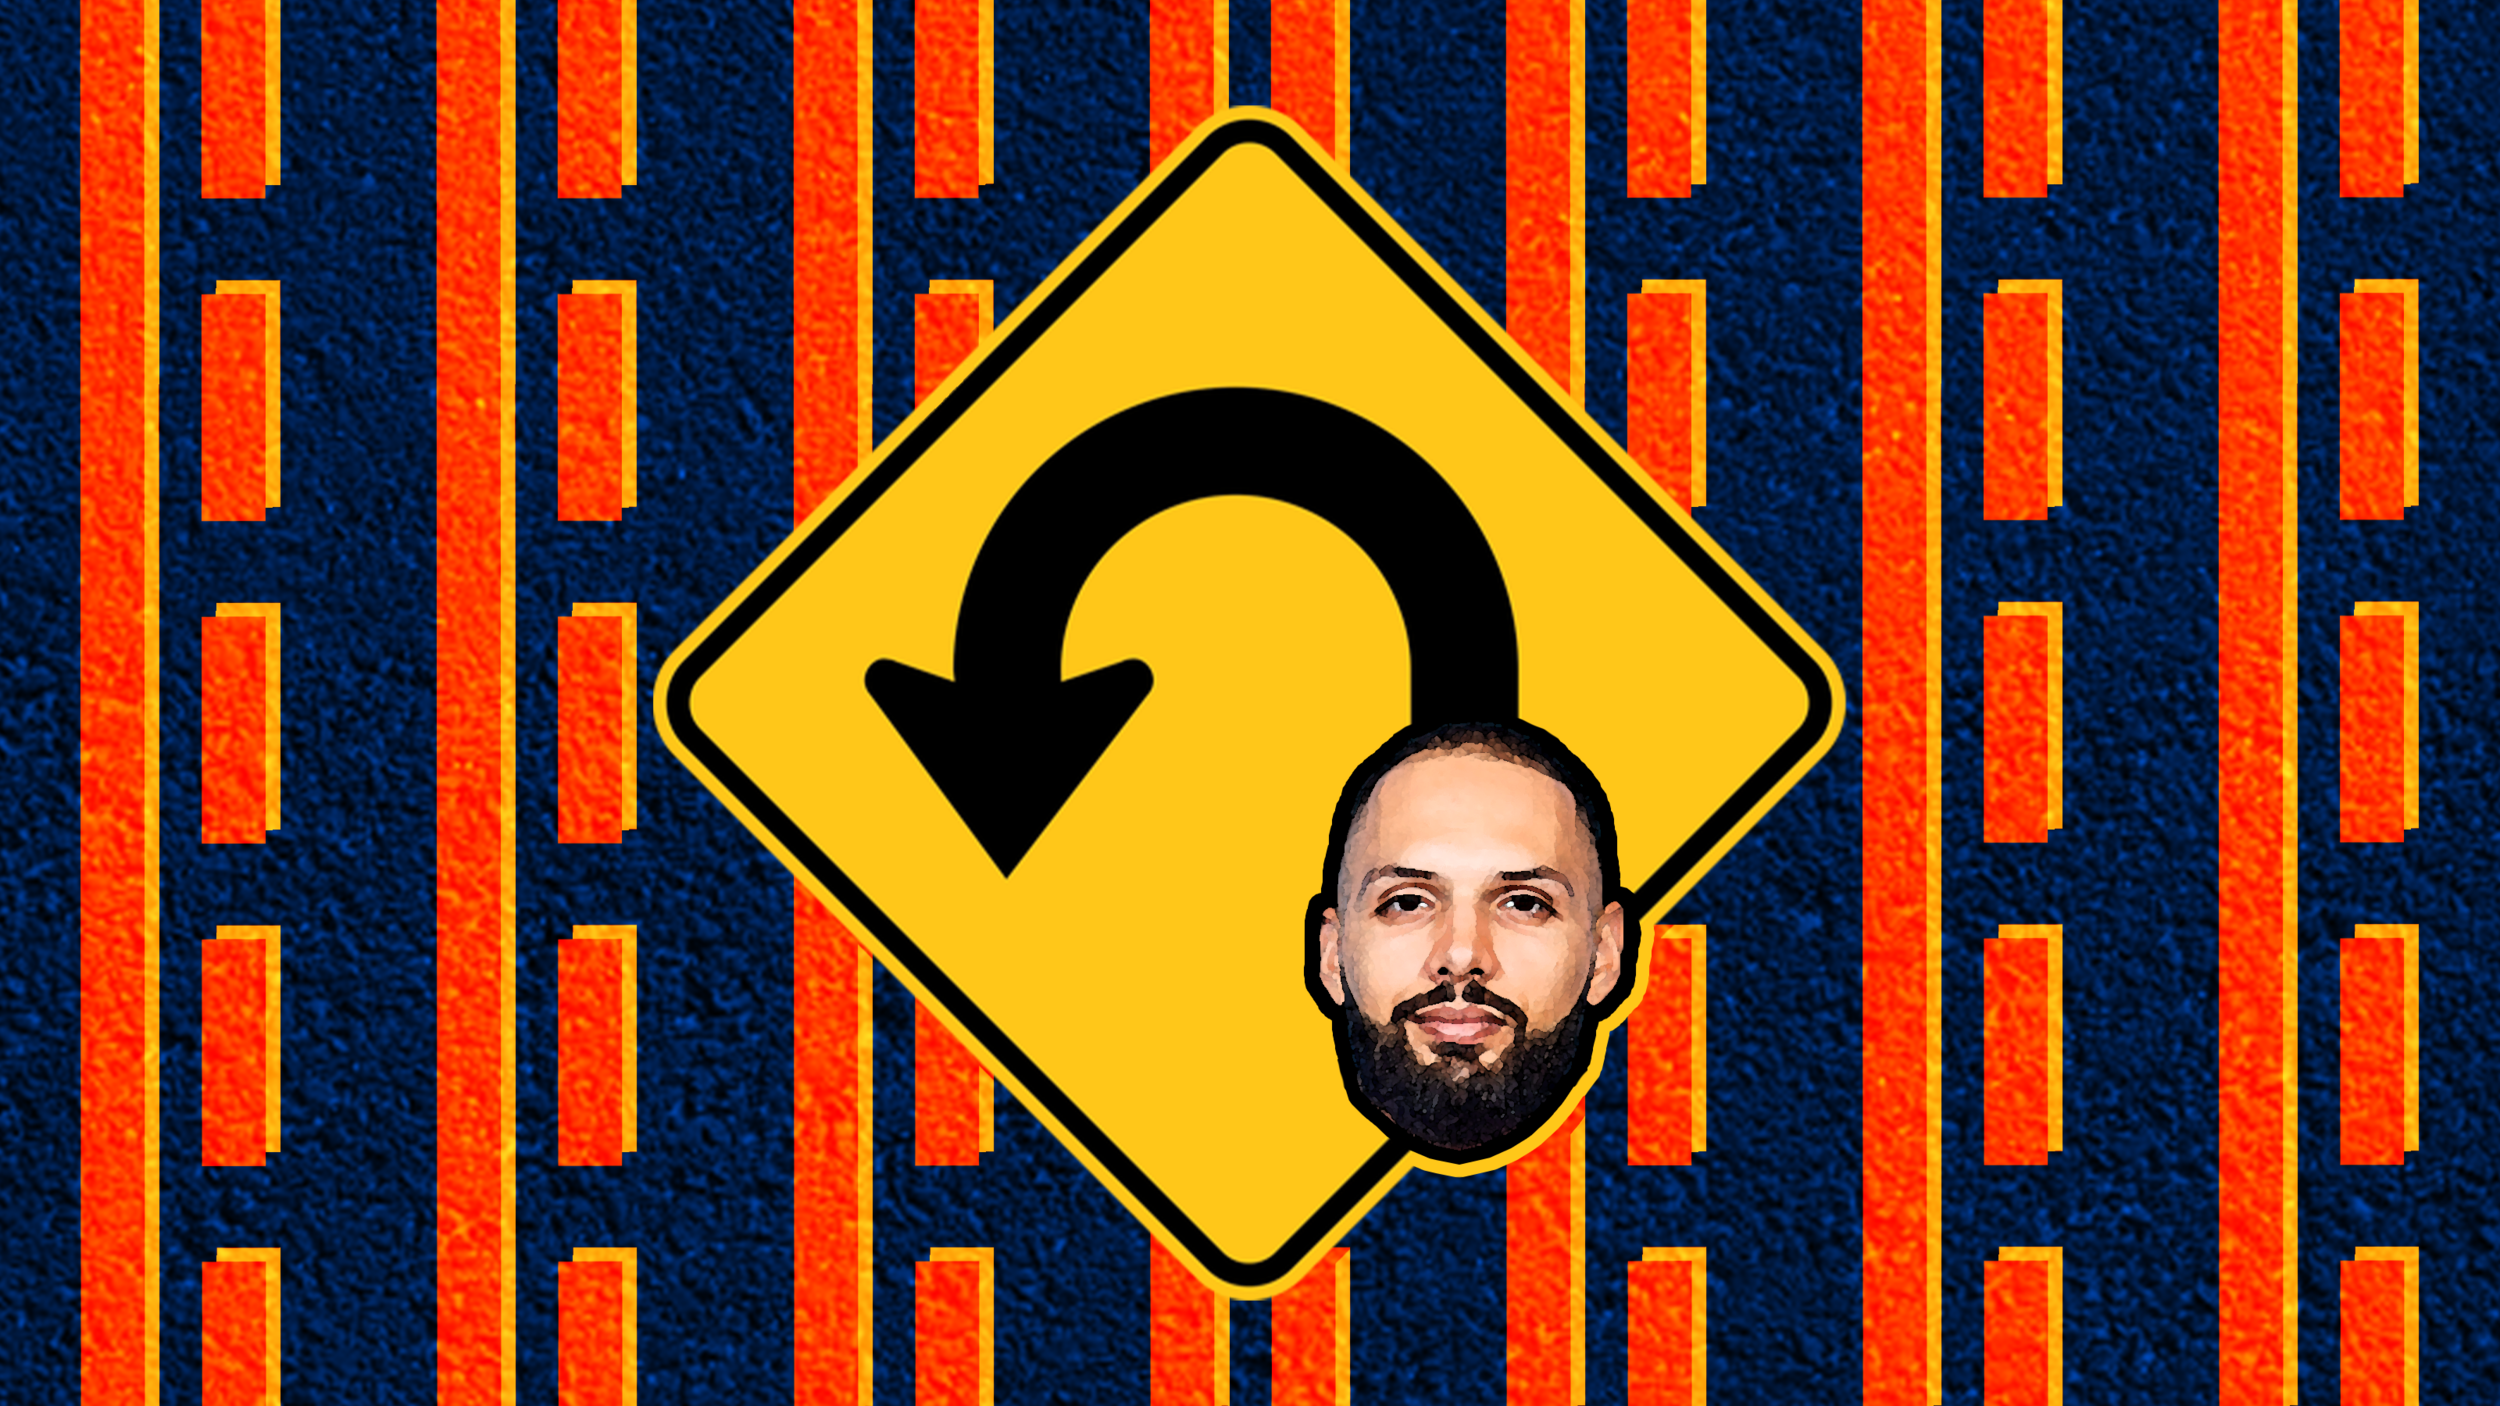 Evan Fournier's First Season and Future as a Knick